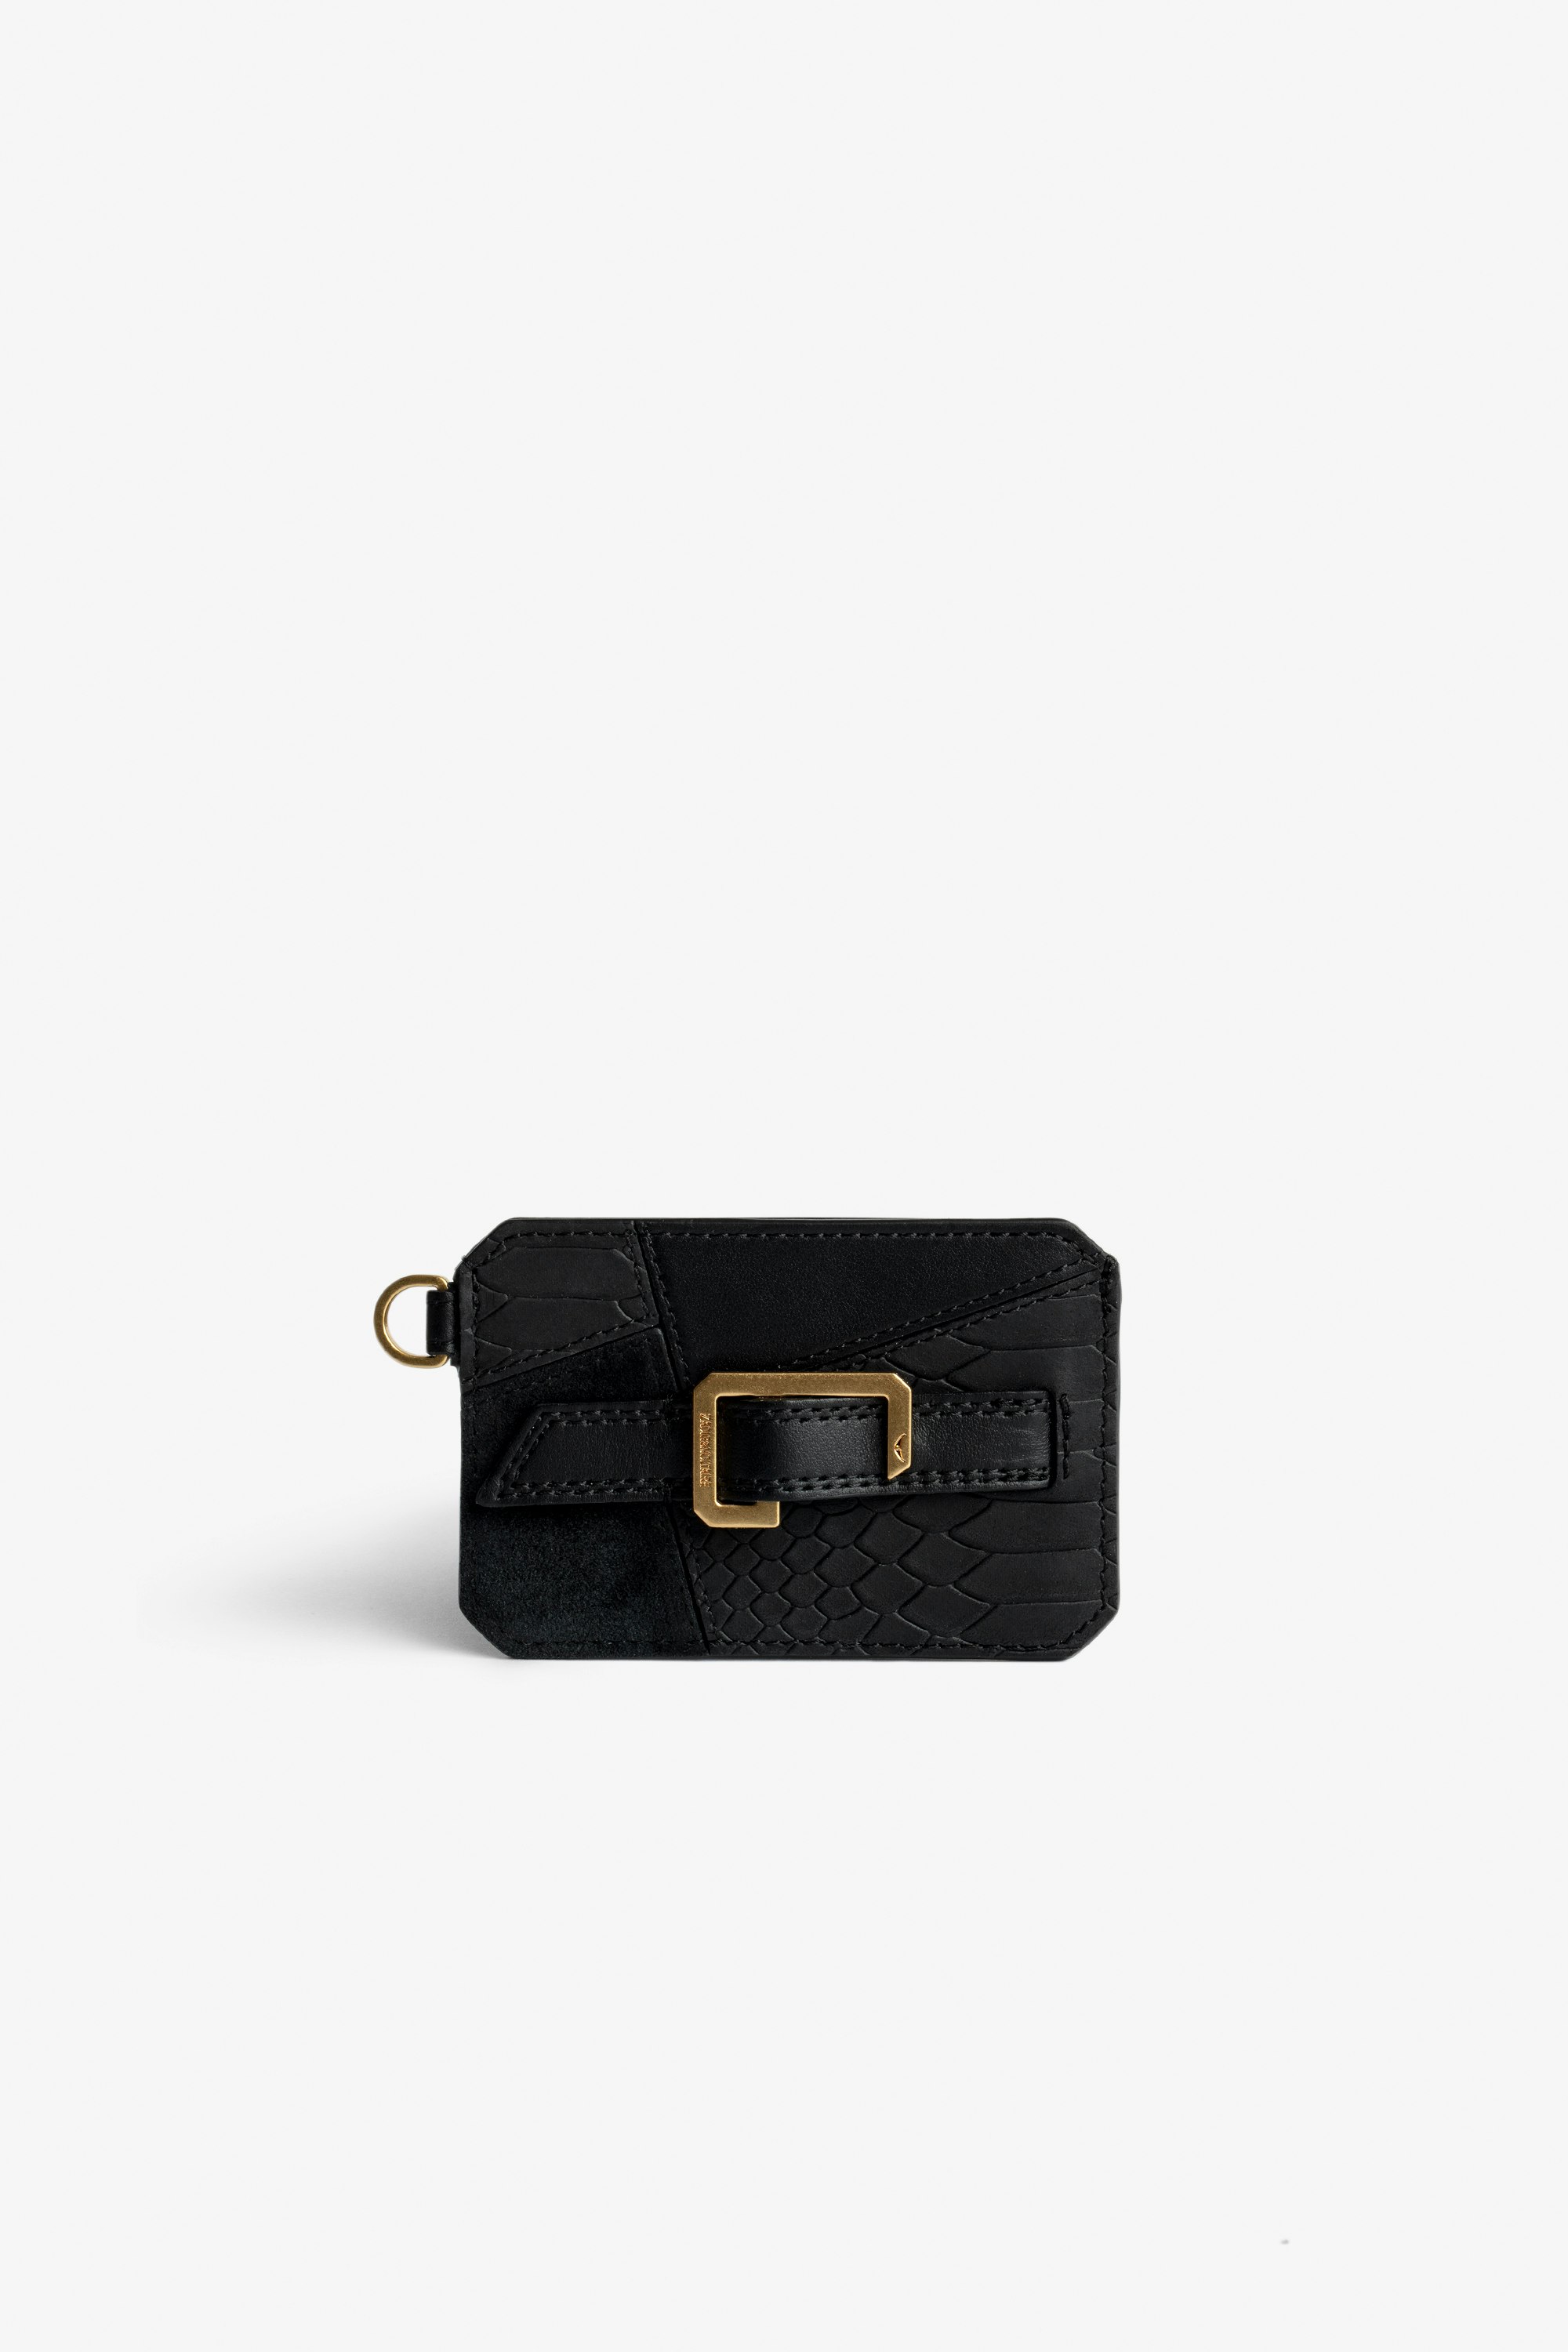 Le Cecilia Pass Card Case Women's card case in black leather patchwork with a C-shaped gold-tone buckle